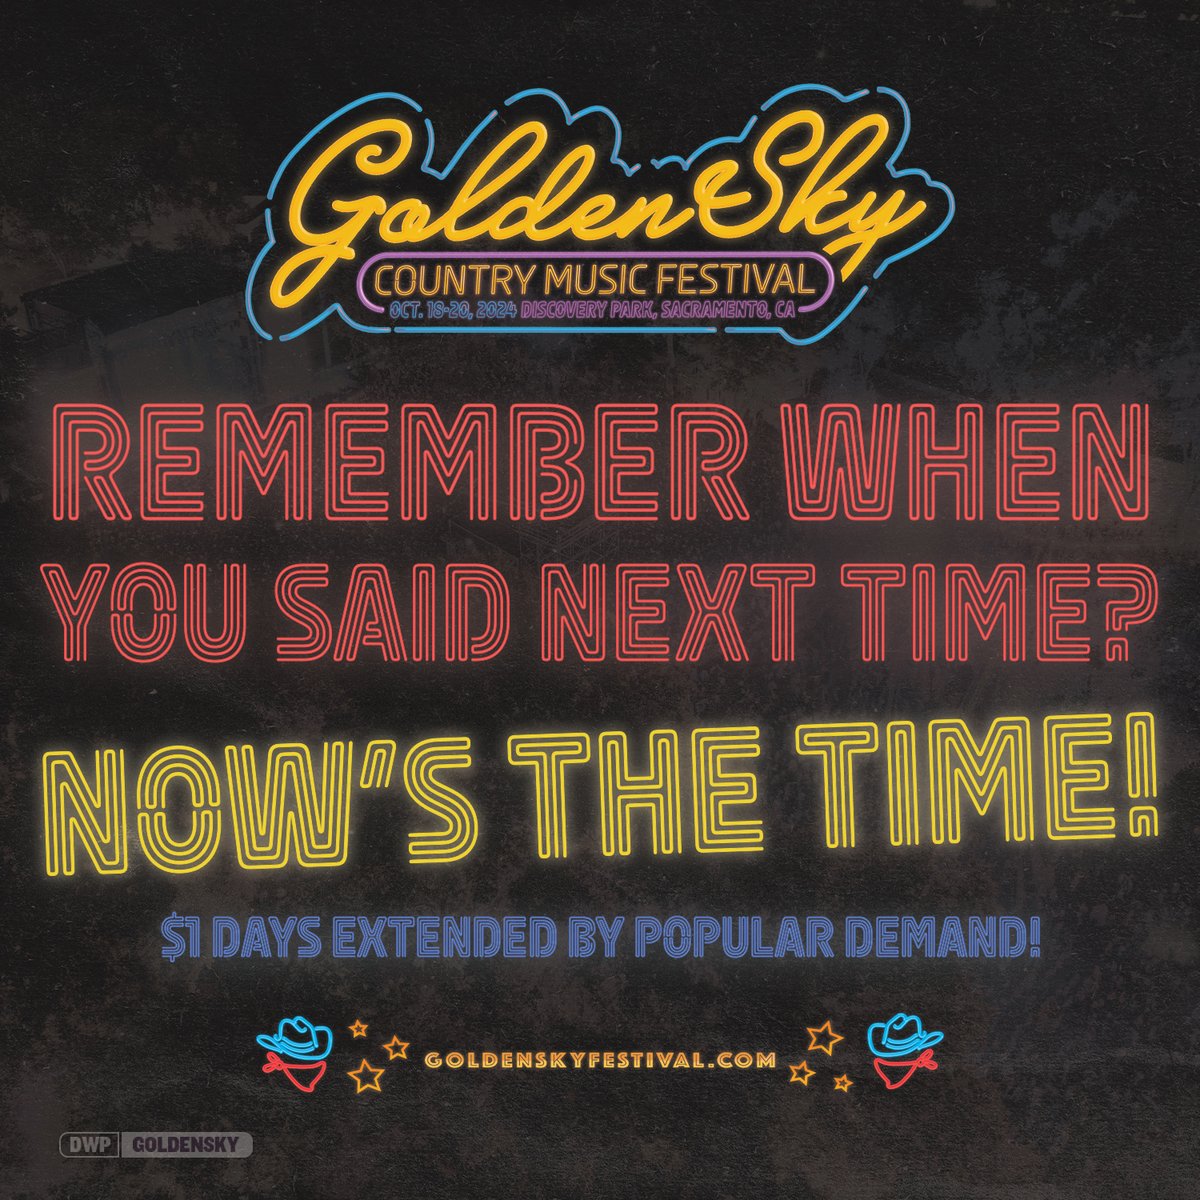 We got news! You asked for more time and the team came through. Dollar Days are extended—act fast before it’s gone! $1 down is all it takes to join the country party. Head to bit.ly/gsdolladays now! 💃 #DWPDollarDays #DollarDaysExtended